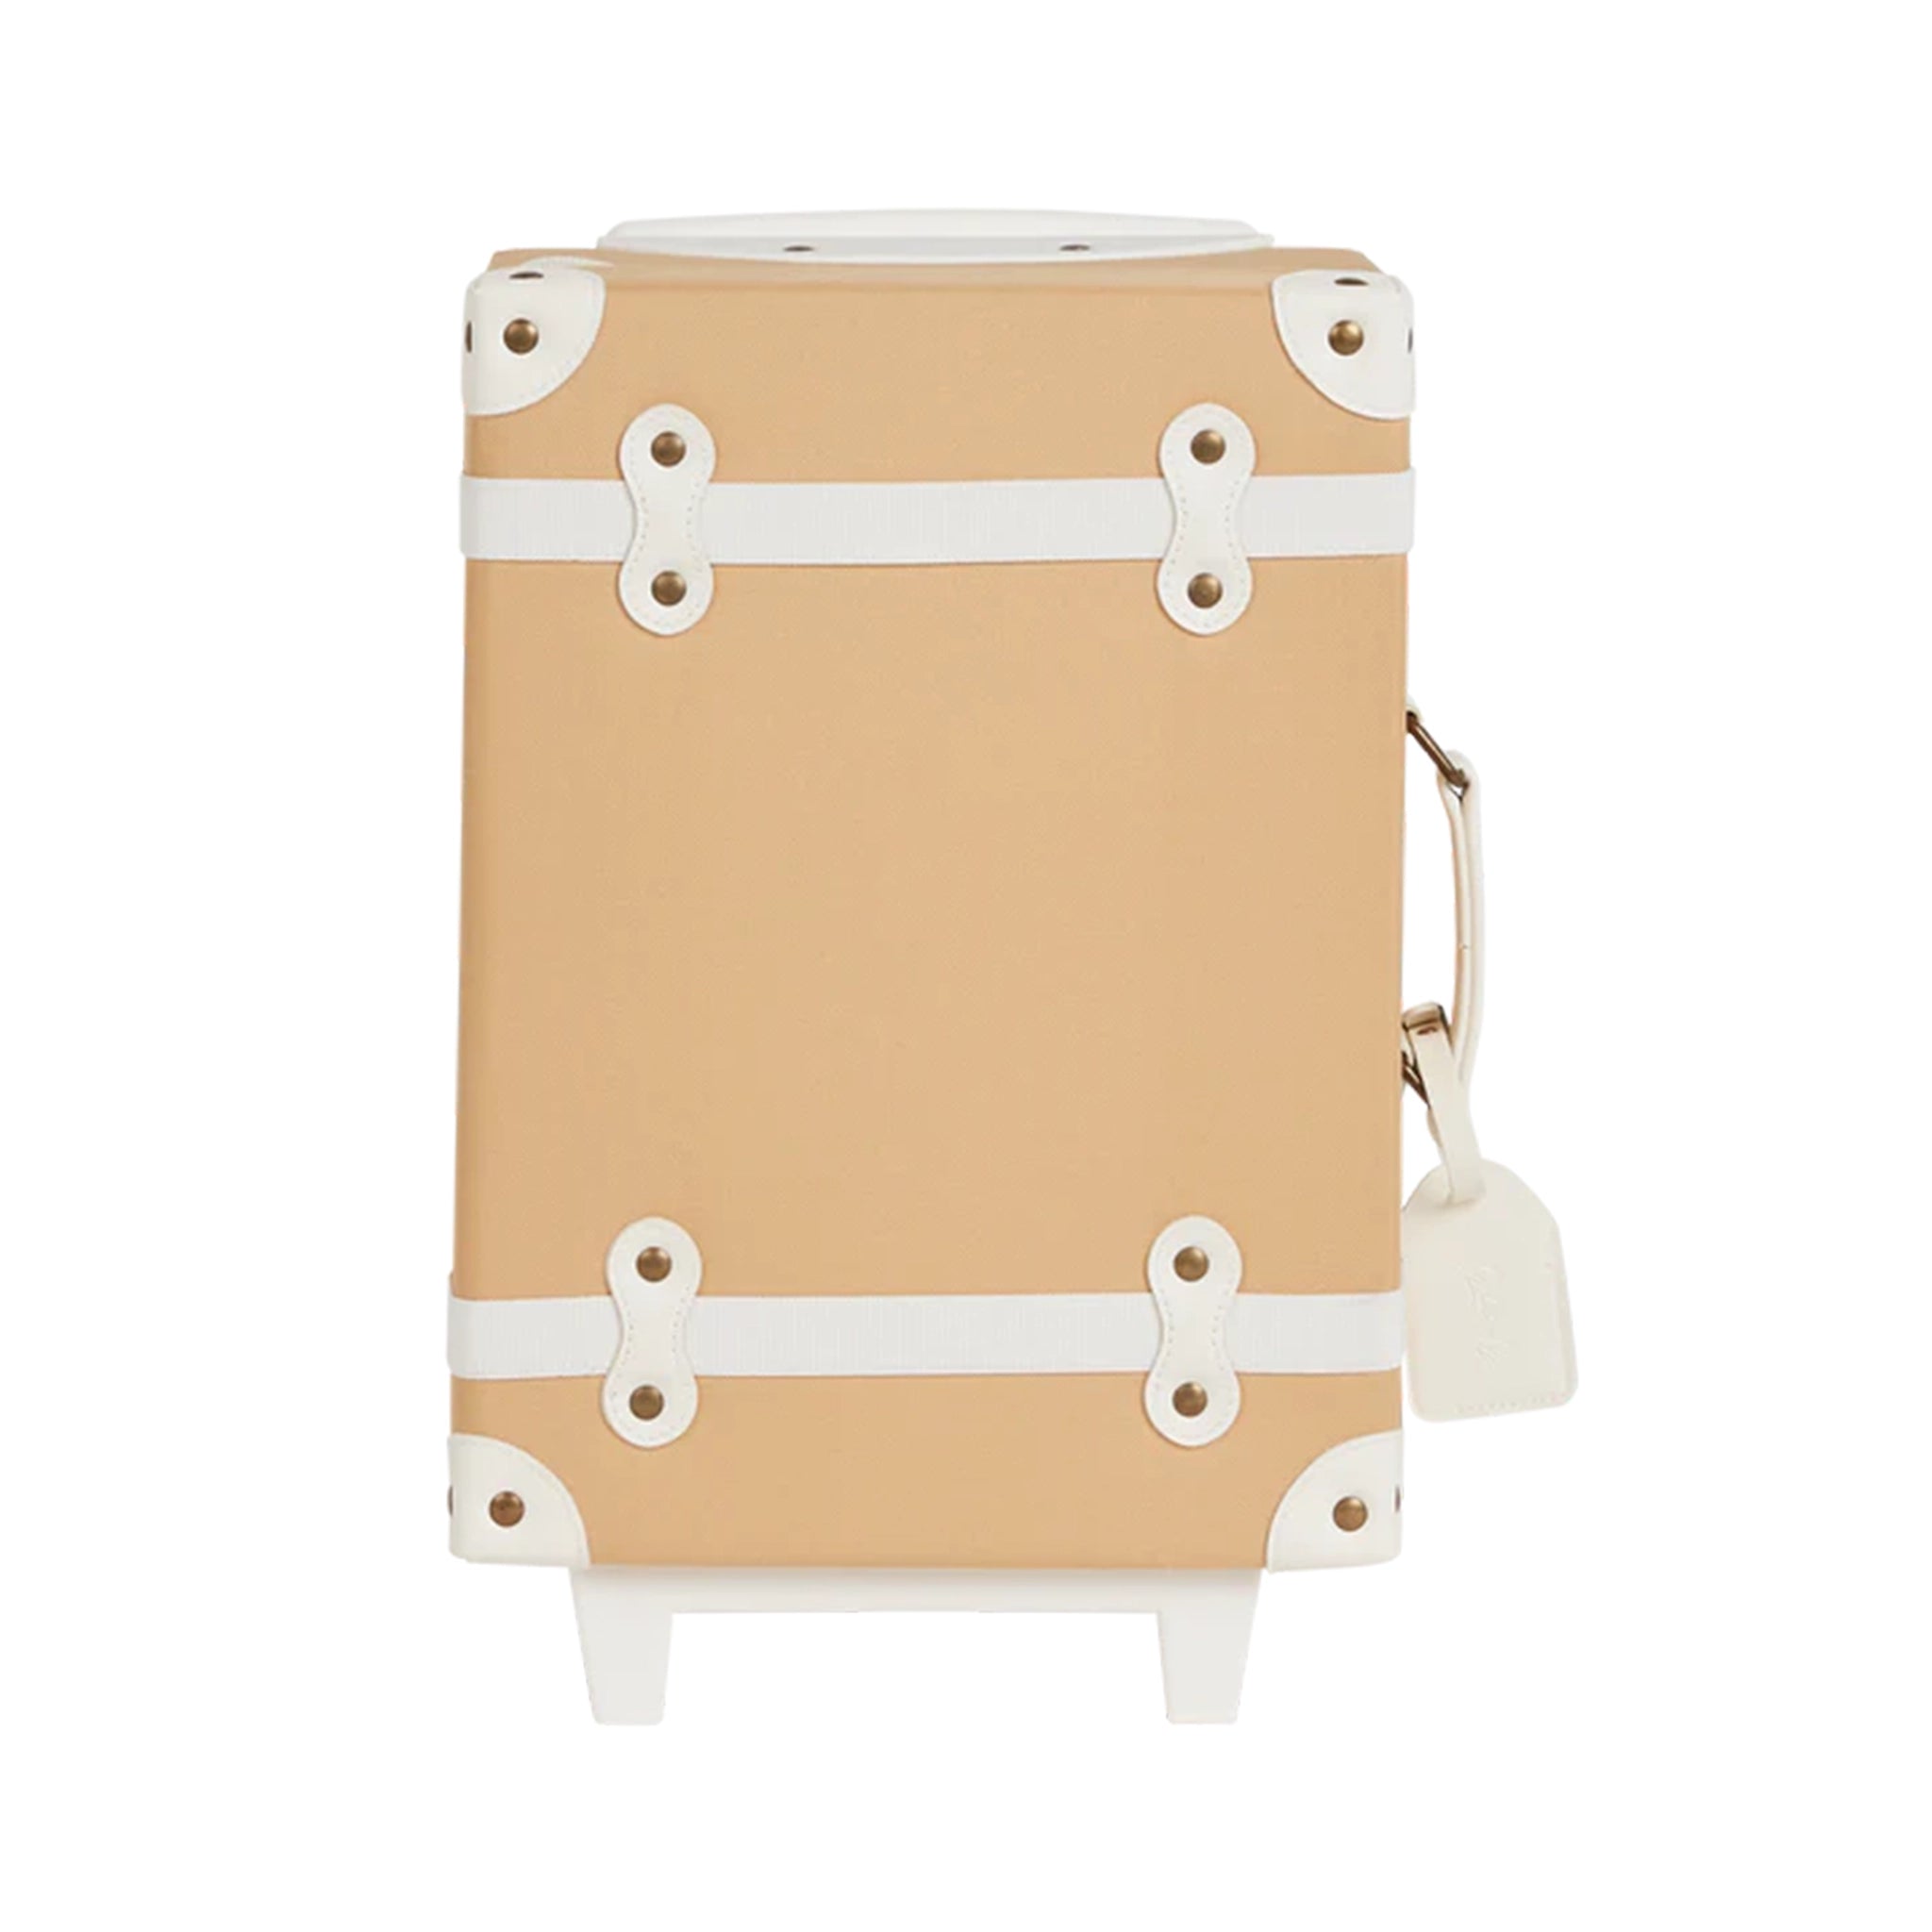 On a white background is a tan/light orange and white kids suitcase. 